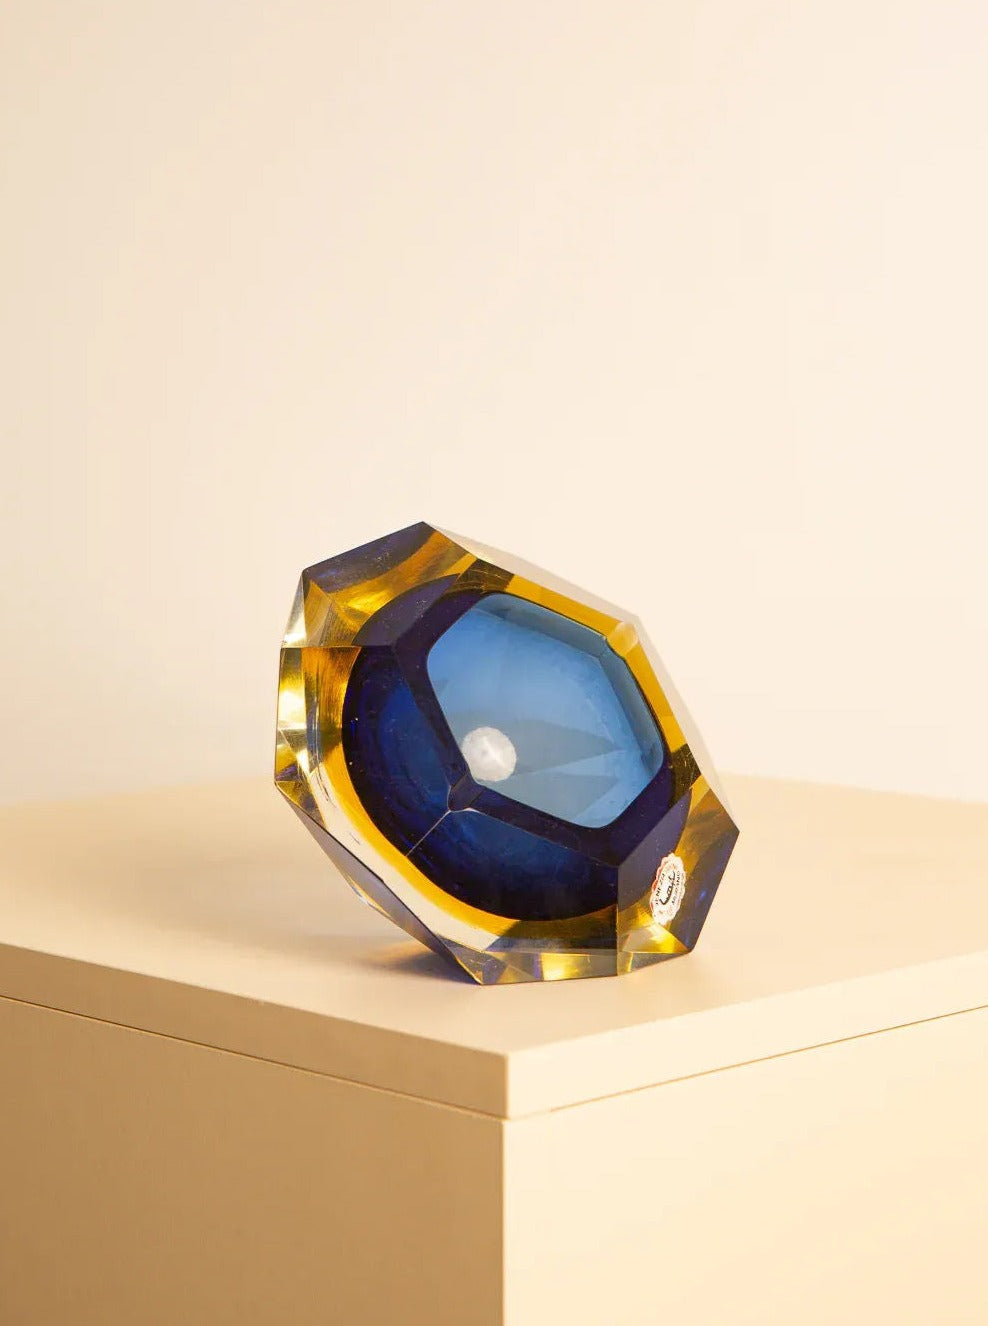 A faceted, multi-colored Large vide-poches blue "Diamond" by Flavio Poli 60's from Treaptyque with shades of blue, yellow, and green sits on a beige surface. The handcrafted piece has an asymmetrical geometric shape, and the light refracts through it, creating a dynamic visual effect.